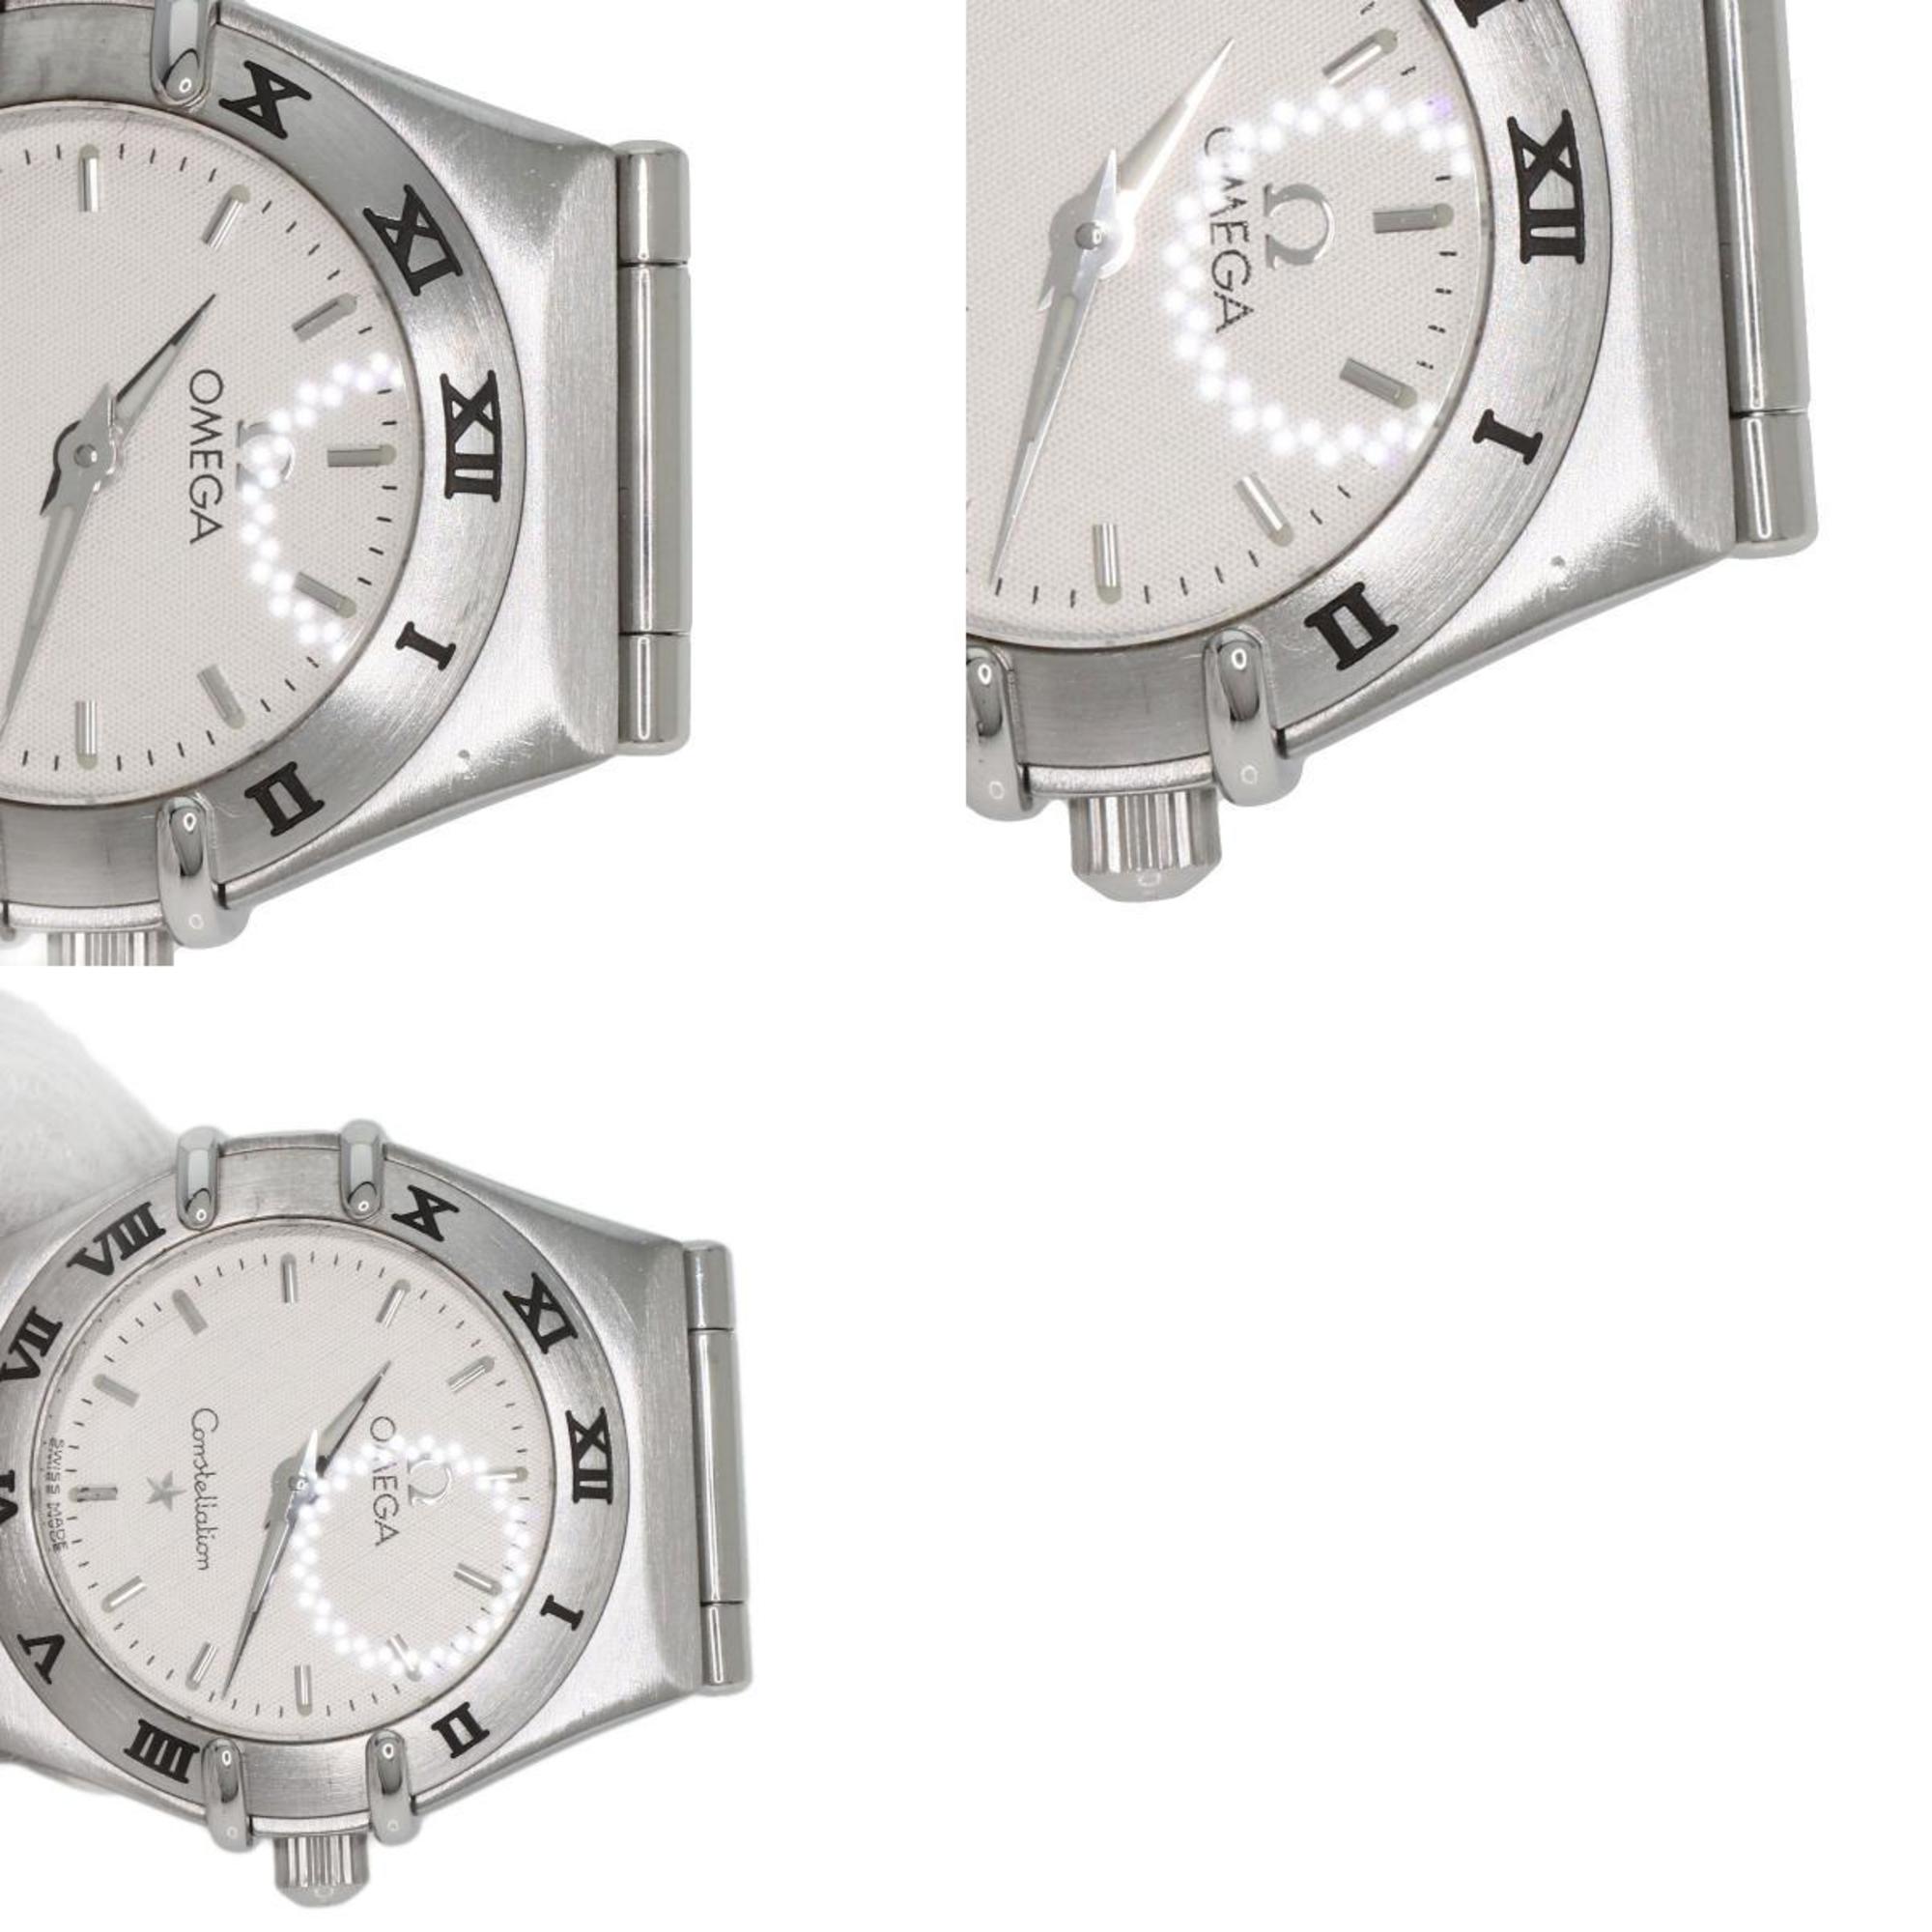 OMEGA 1562.30 Constellation Watch Stainless Steel SS Ladies